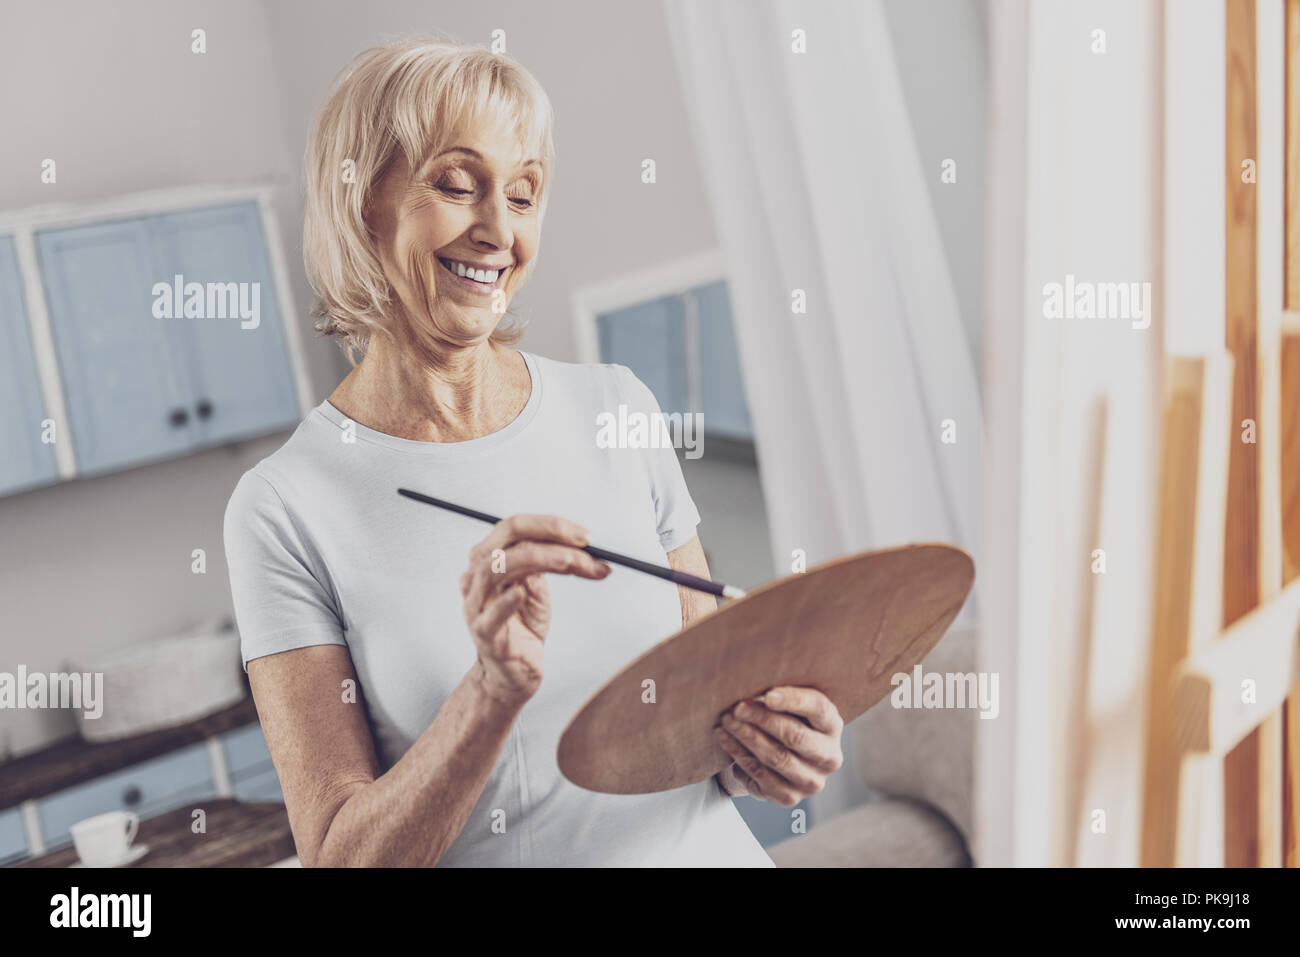 Professional artist holding color palette while drawing Stock Photo